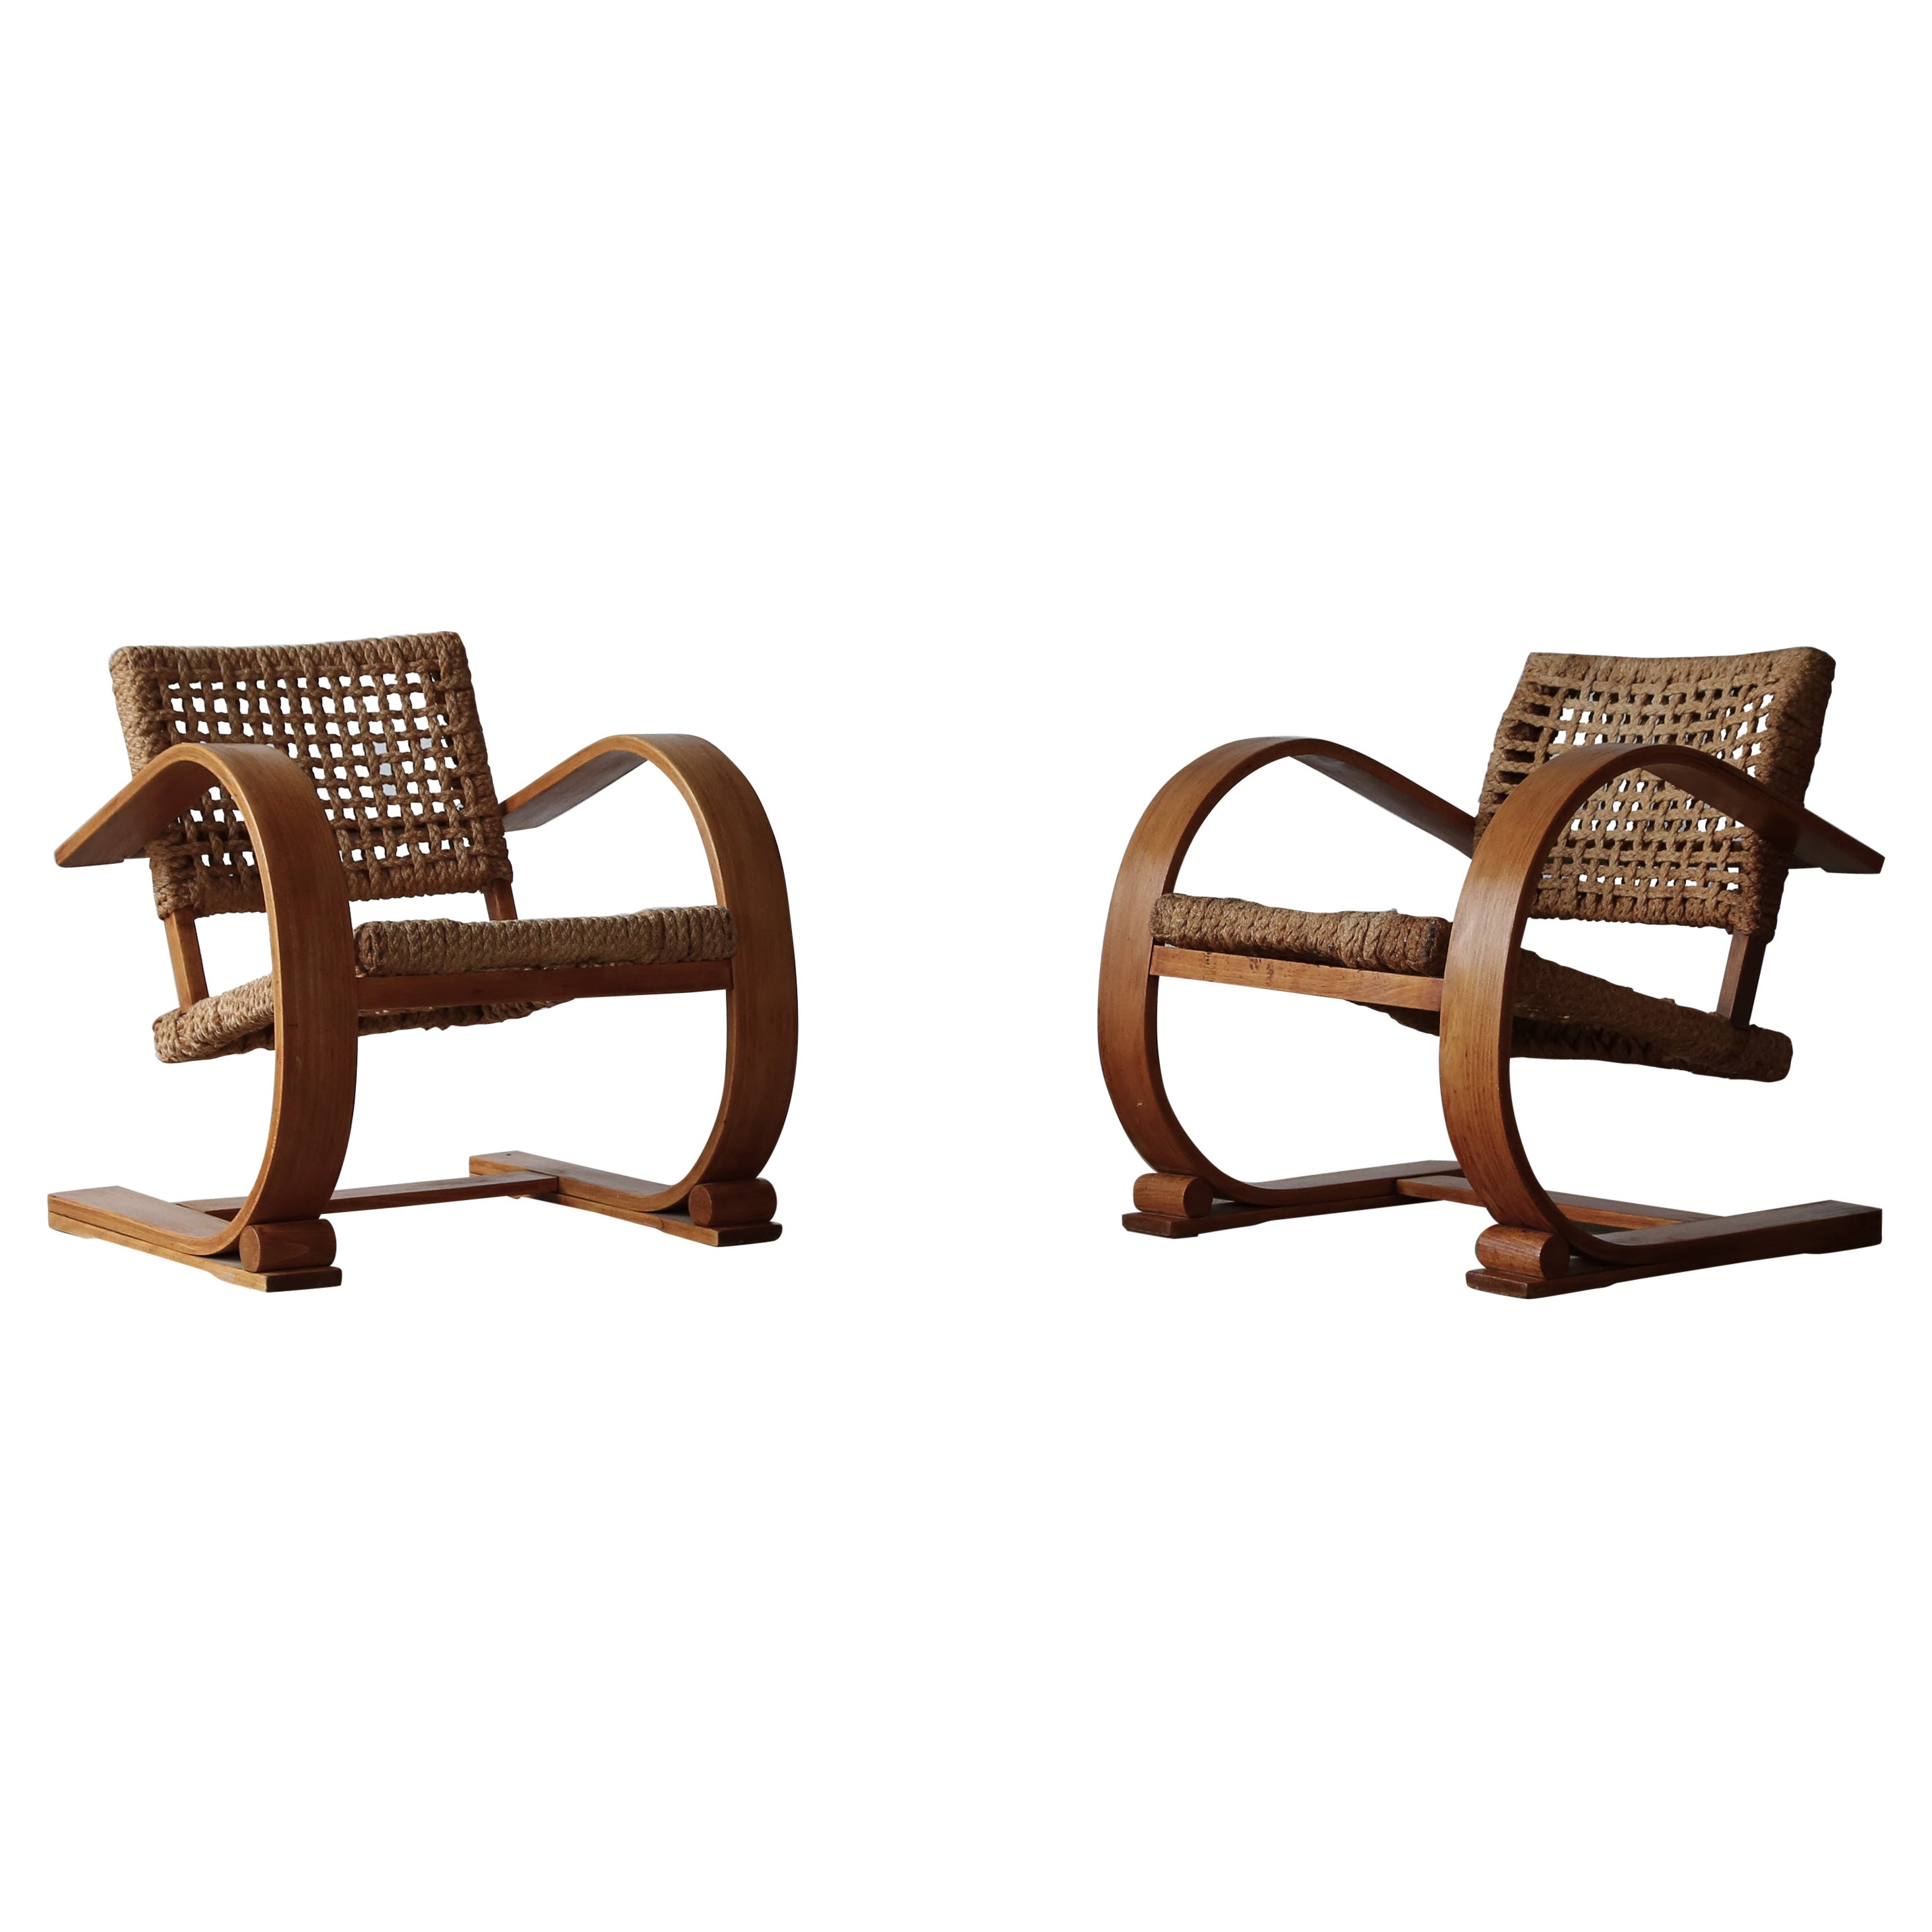 Pair of Audoux & Minet Rope Chairs, Vibo, France, 1950s